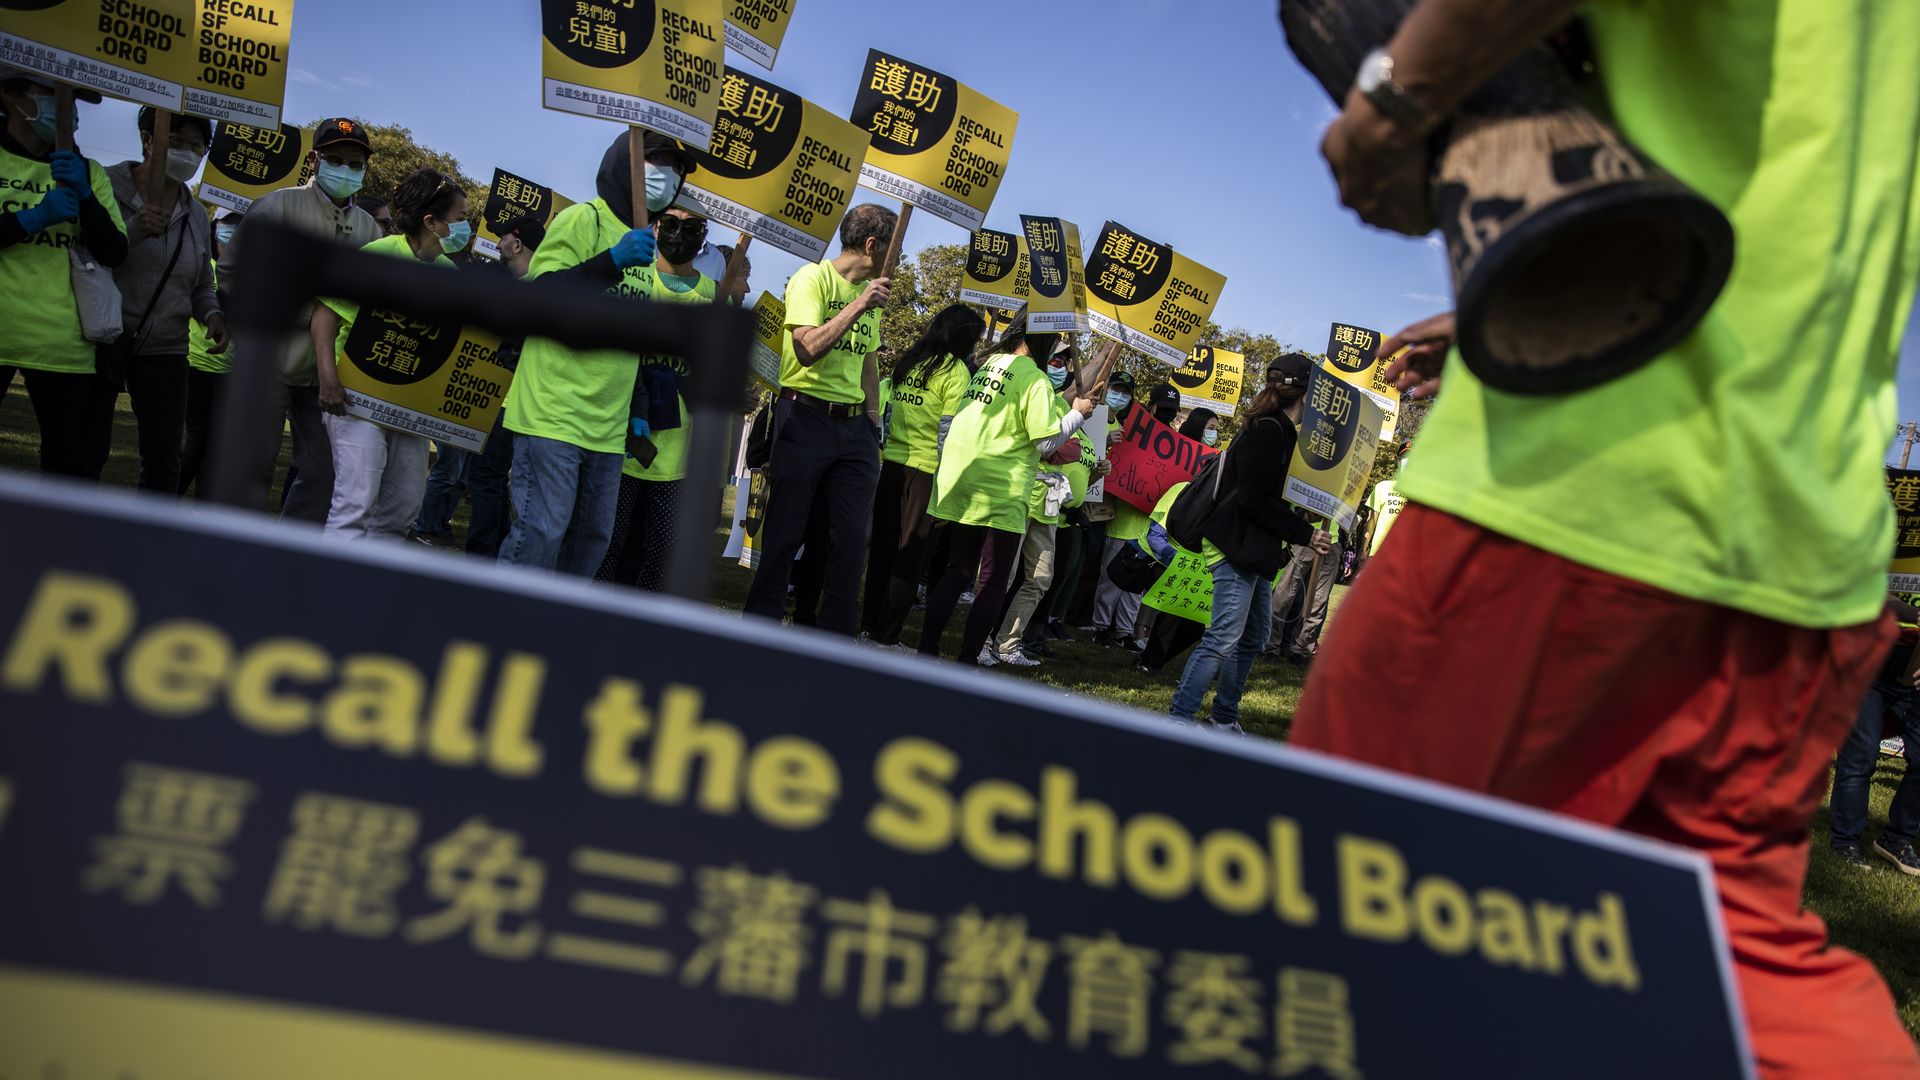 Photo of a crowd of Asian protesters holding signs that say "Recall the School Board" in English and Chinese